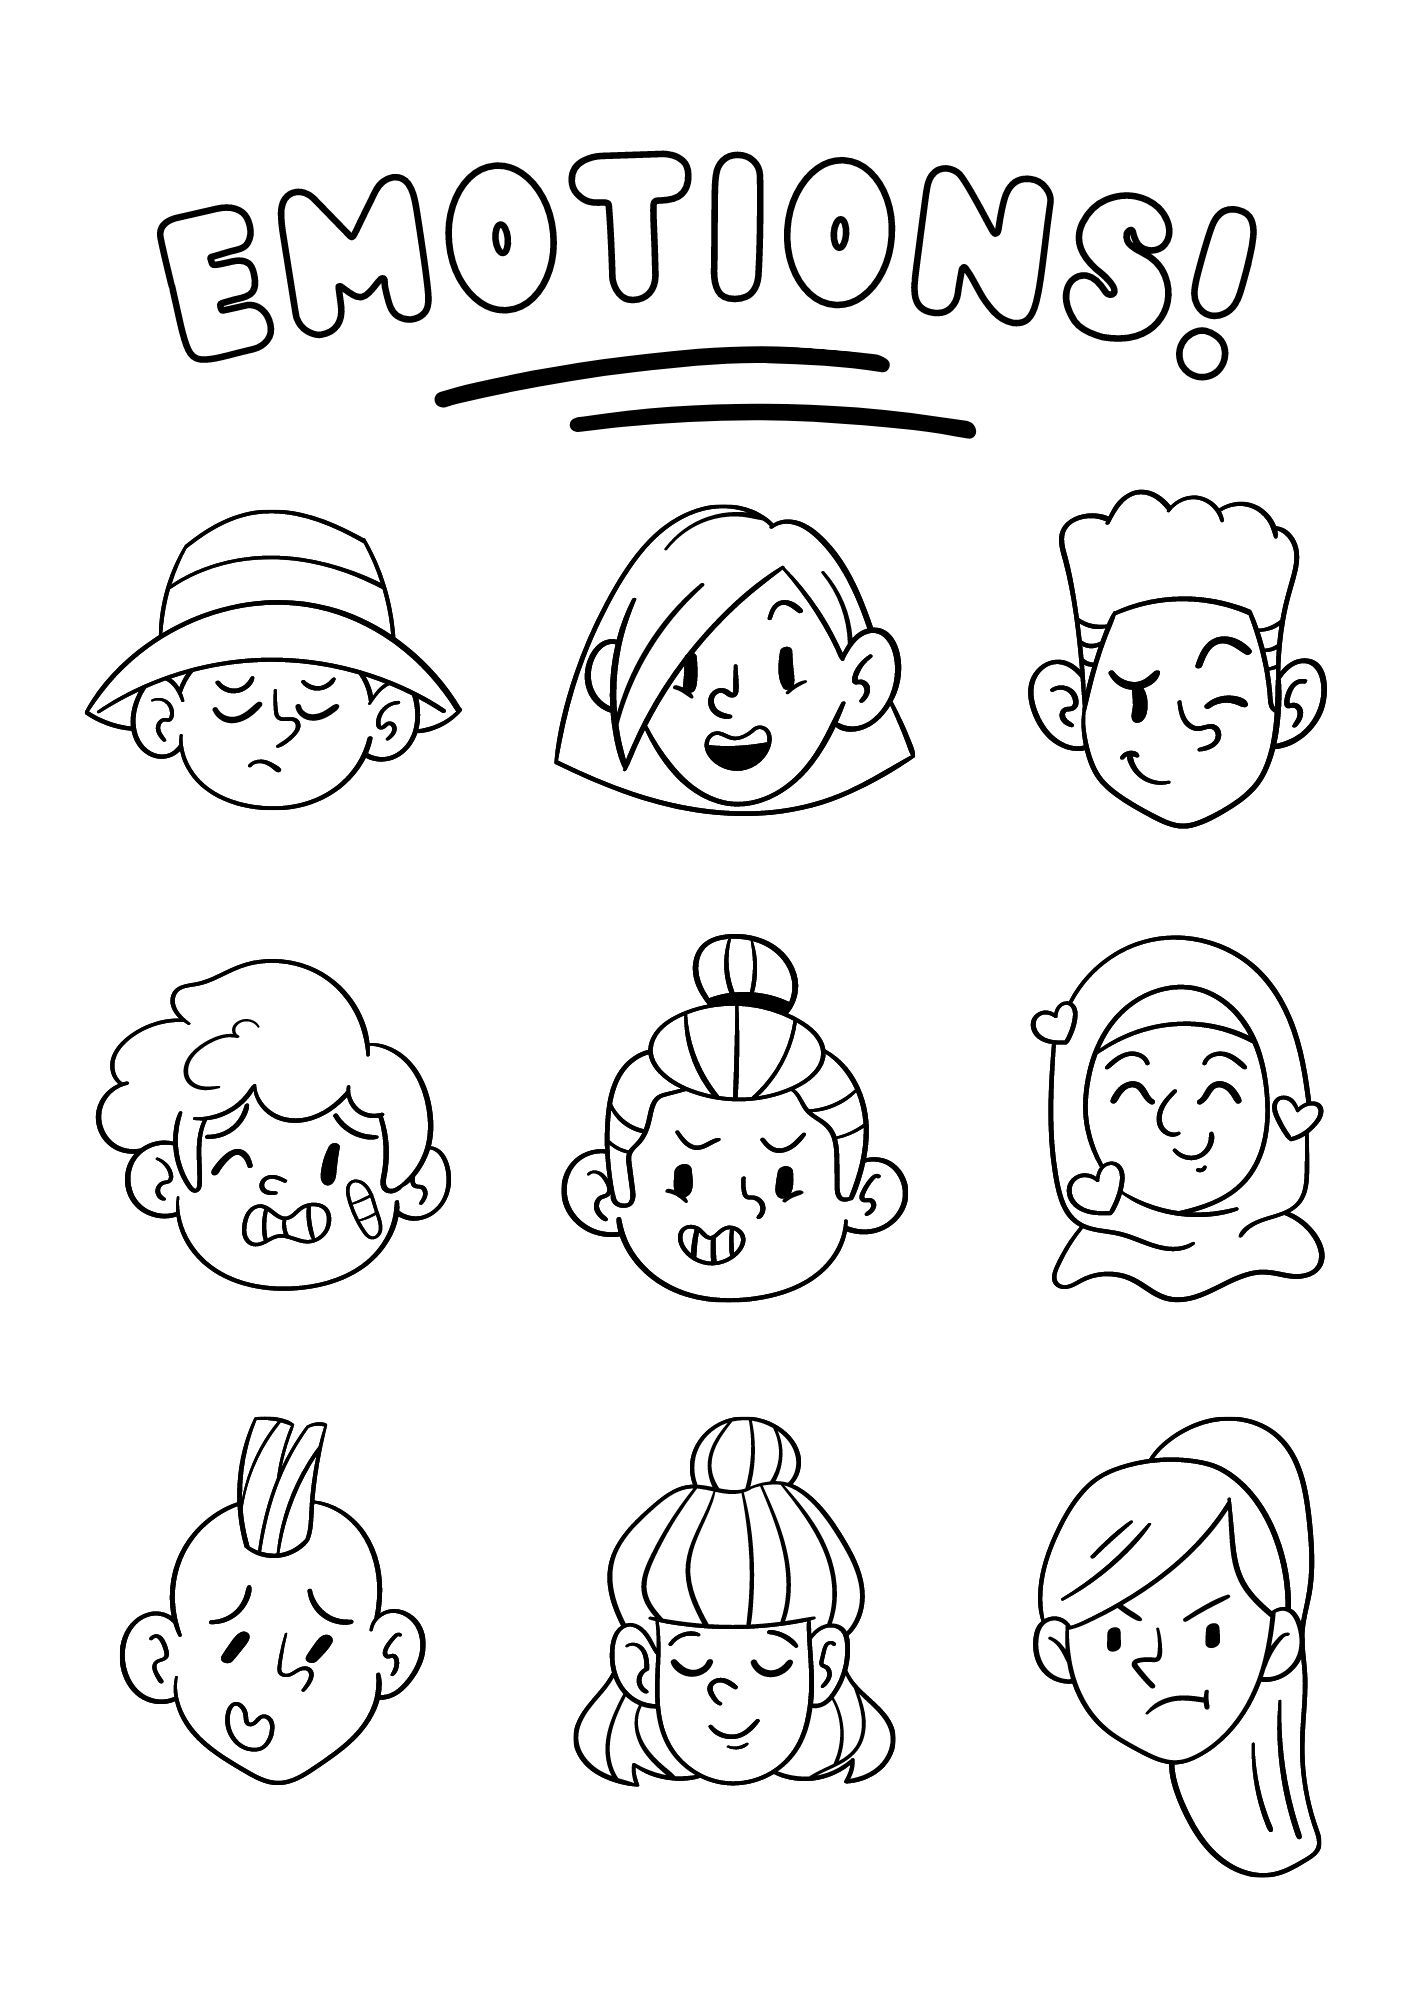 Free Children's Printable Learning and Colouring Resources.